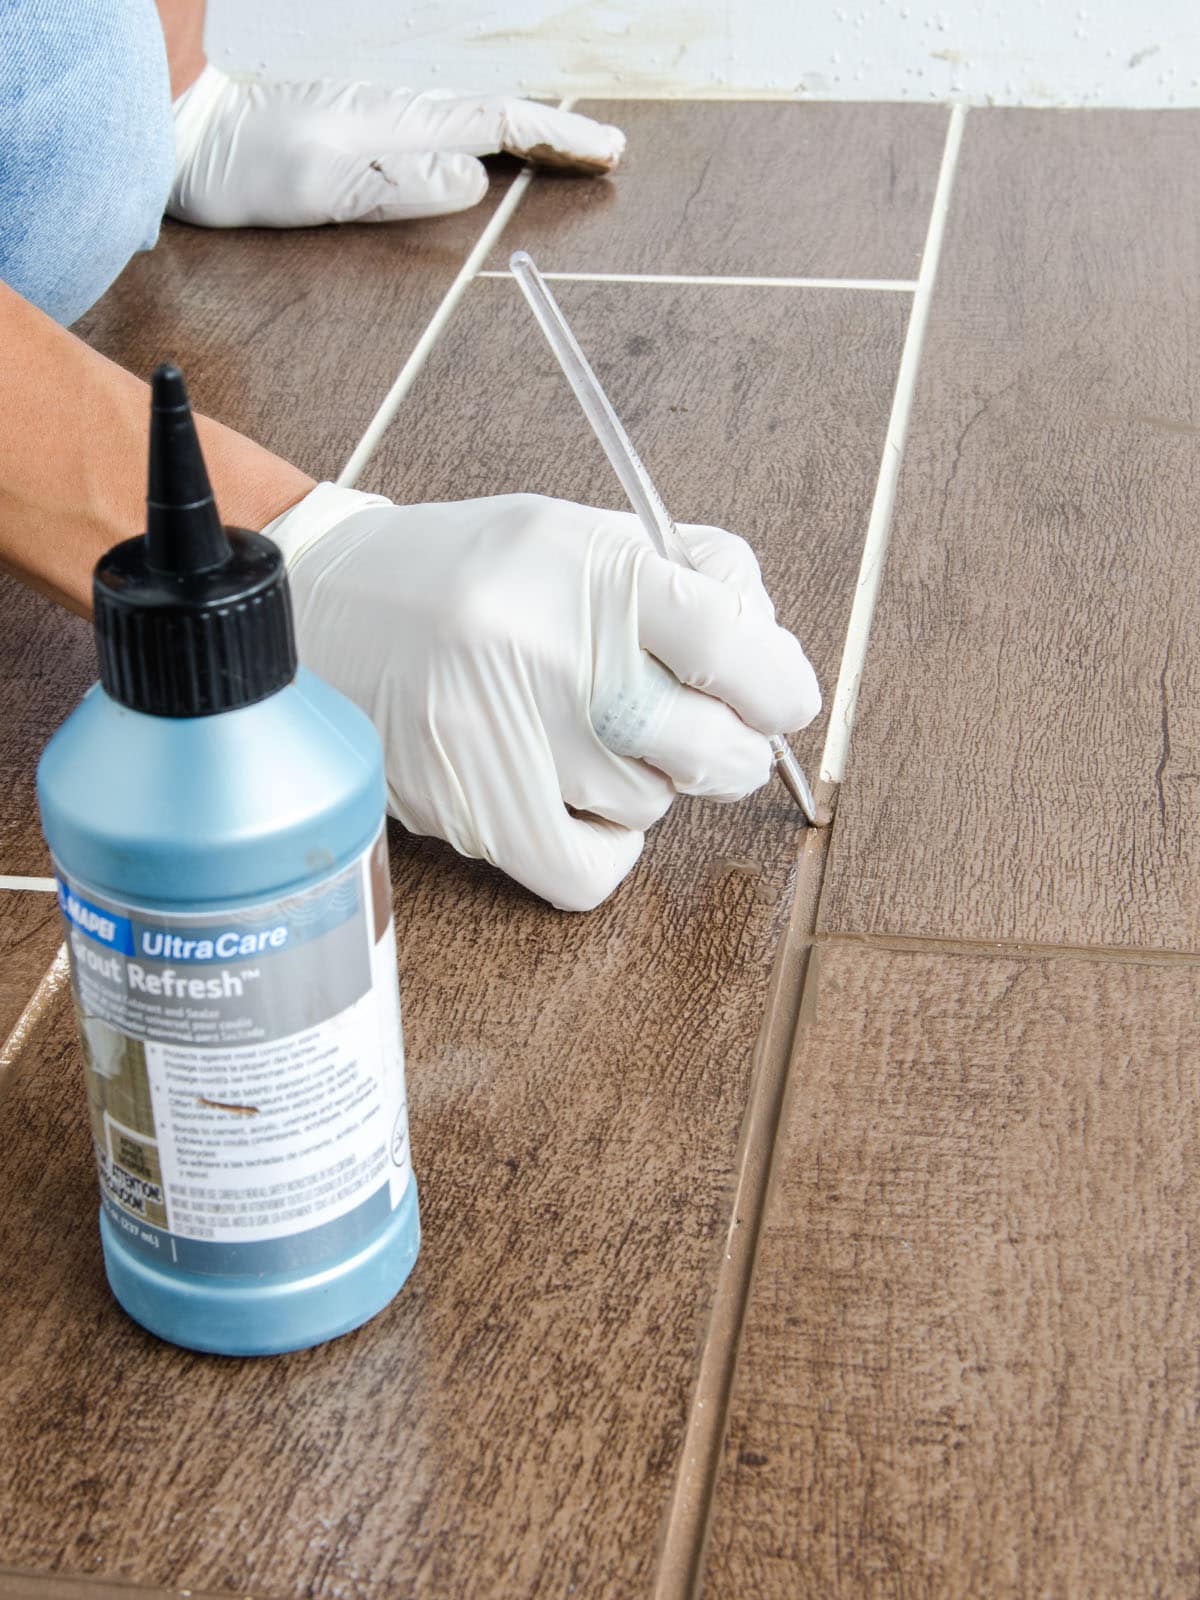 Mapei UltraCare Acidic Tile & Grout Cleaner (1 Qt.)